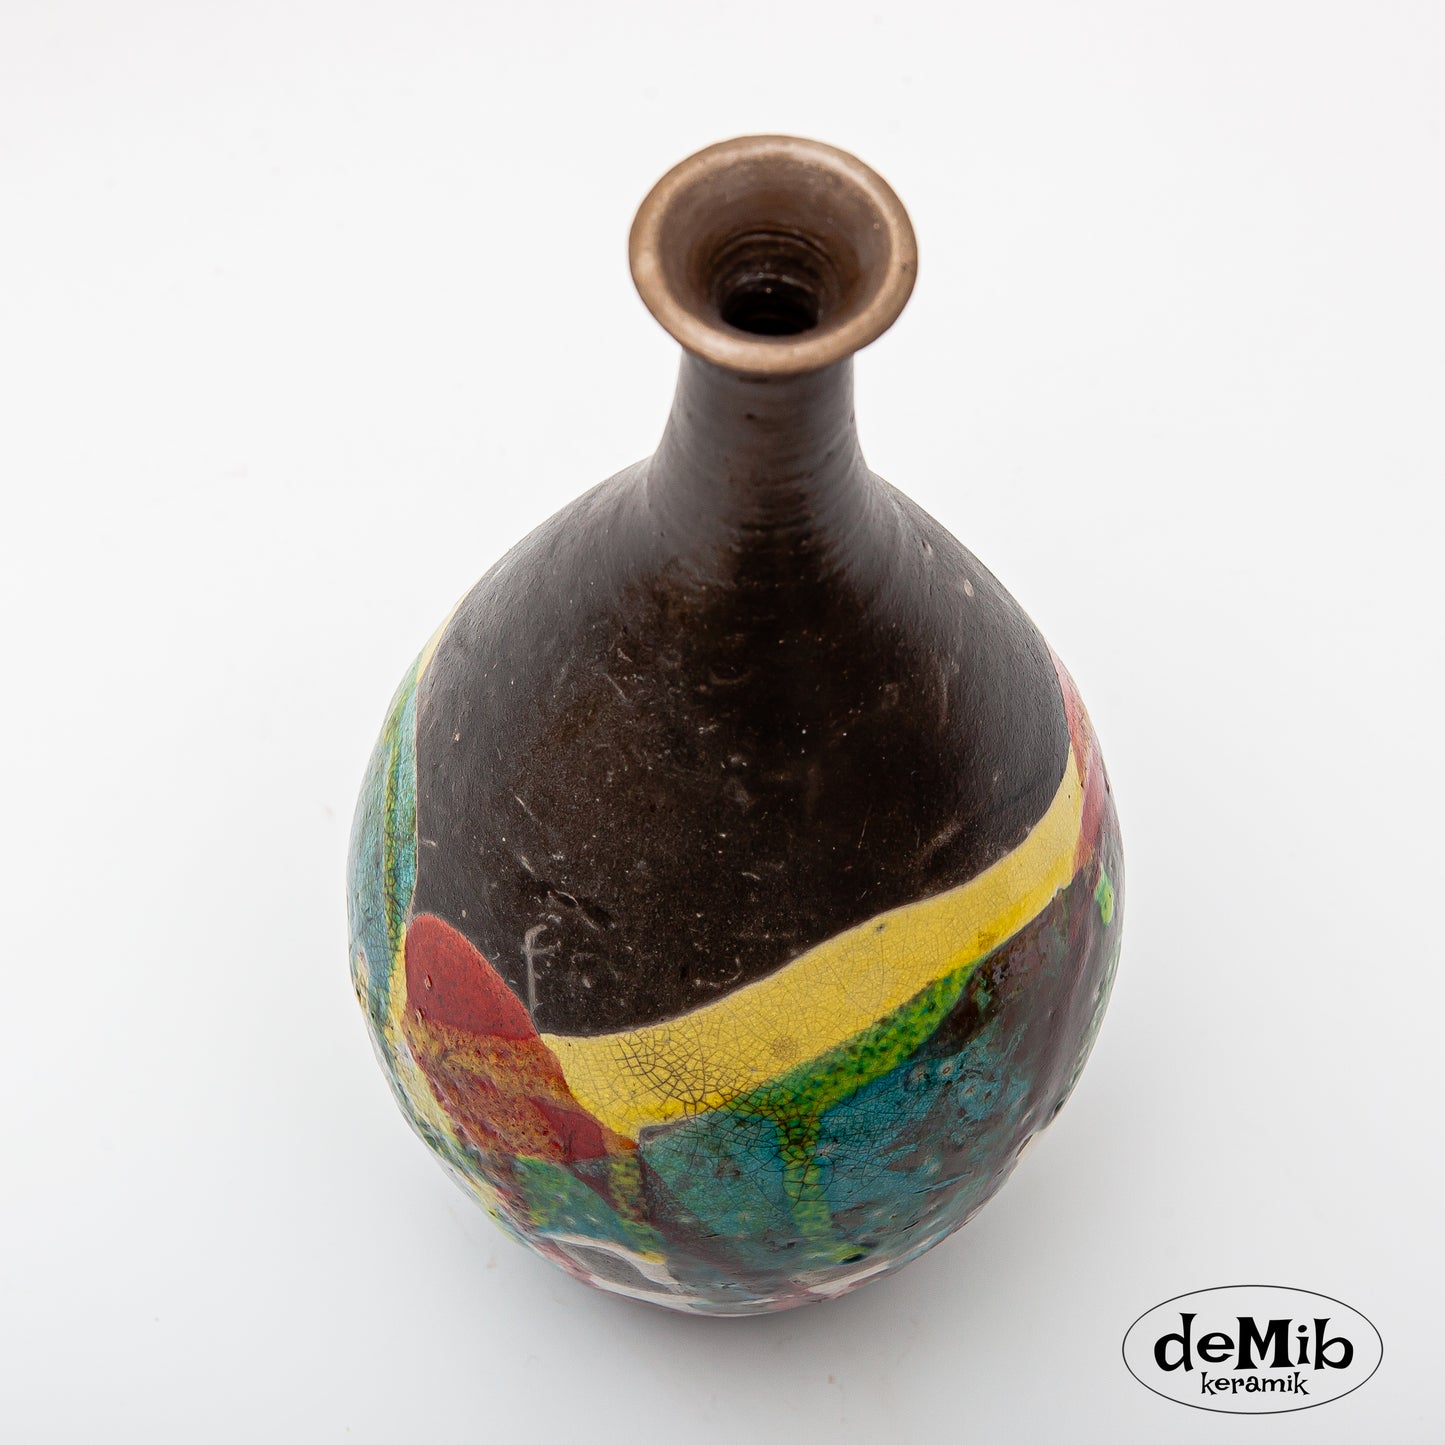 Tall Raku Fired Vase with Strong Colors (30 cm)